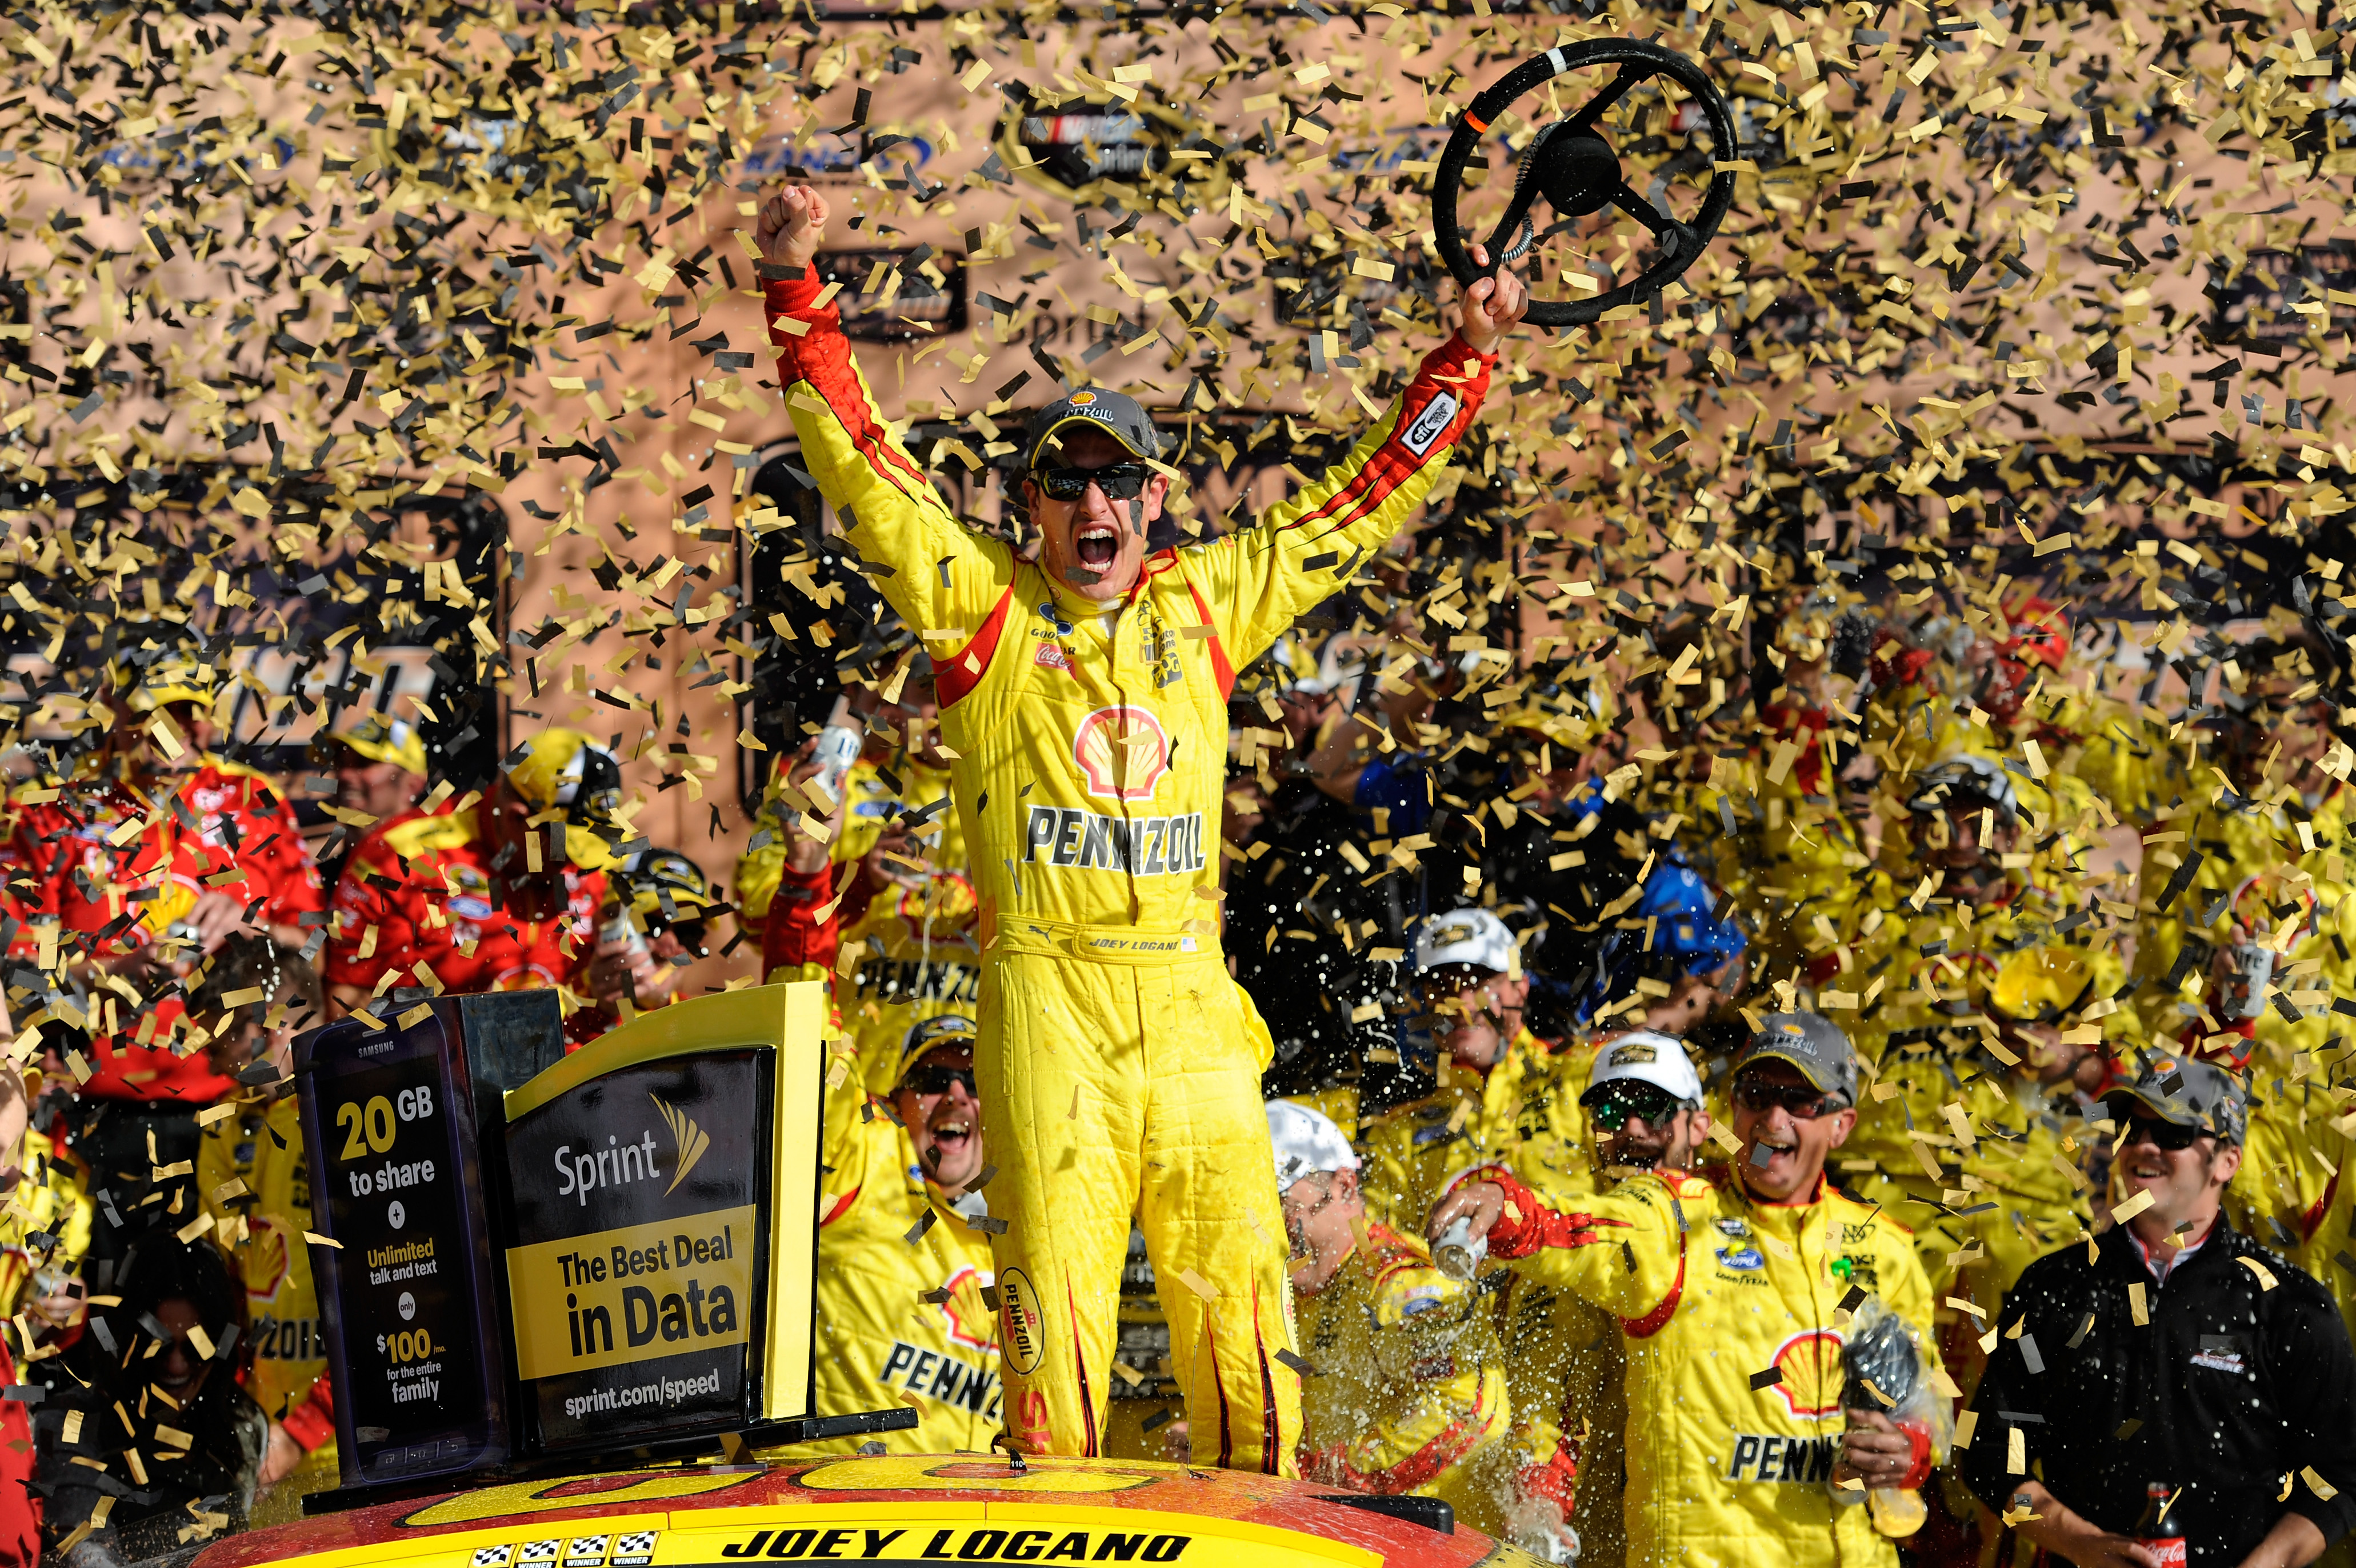 The first contender that won't be eliminated in this round of the Chase is Joey Logano.